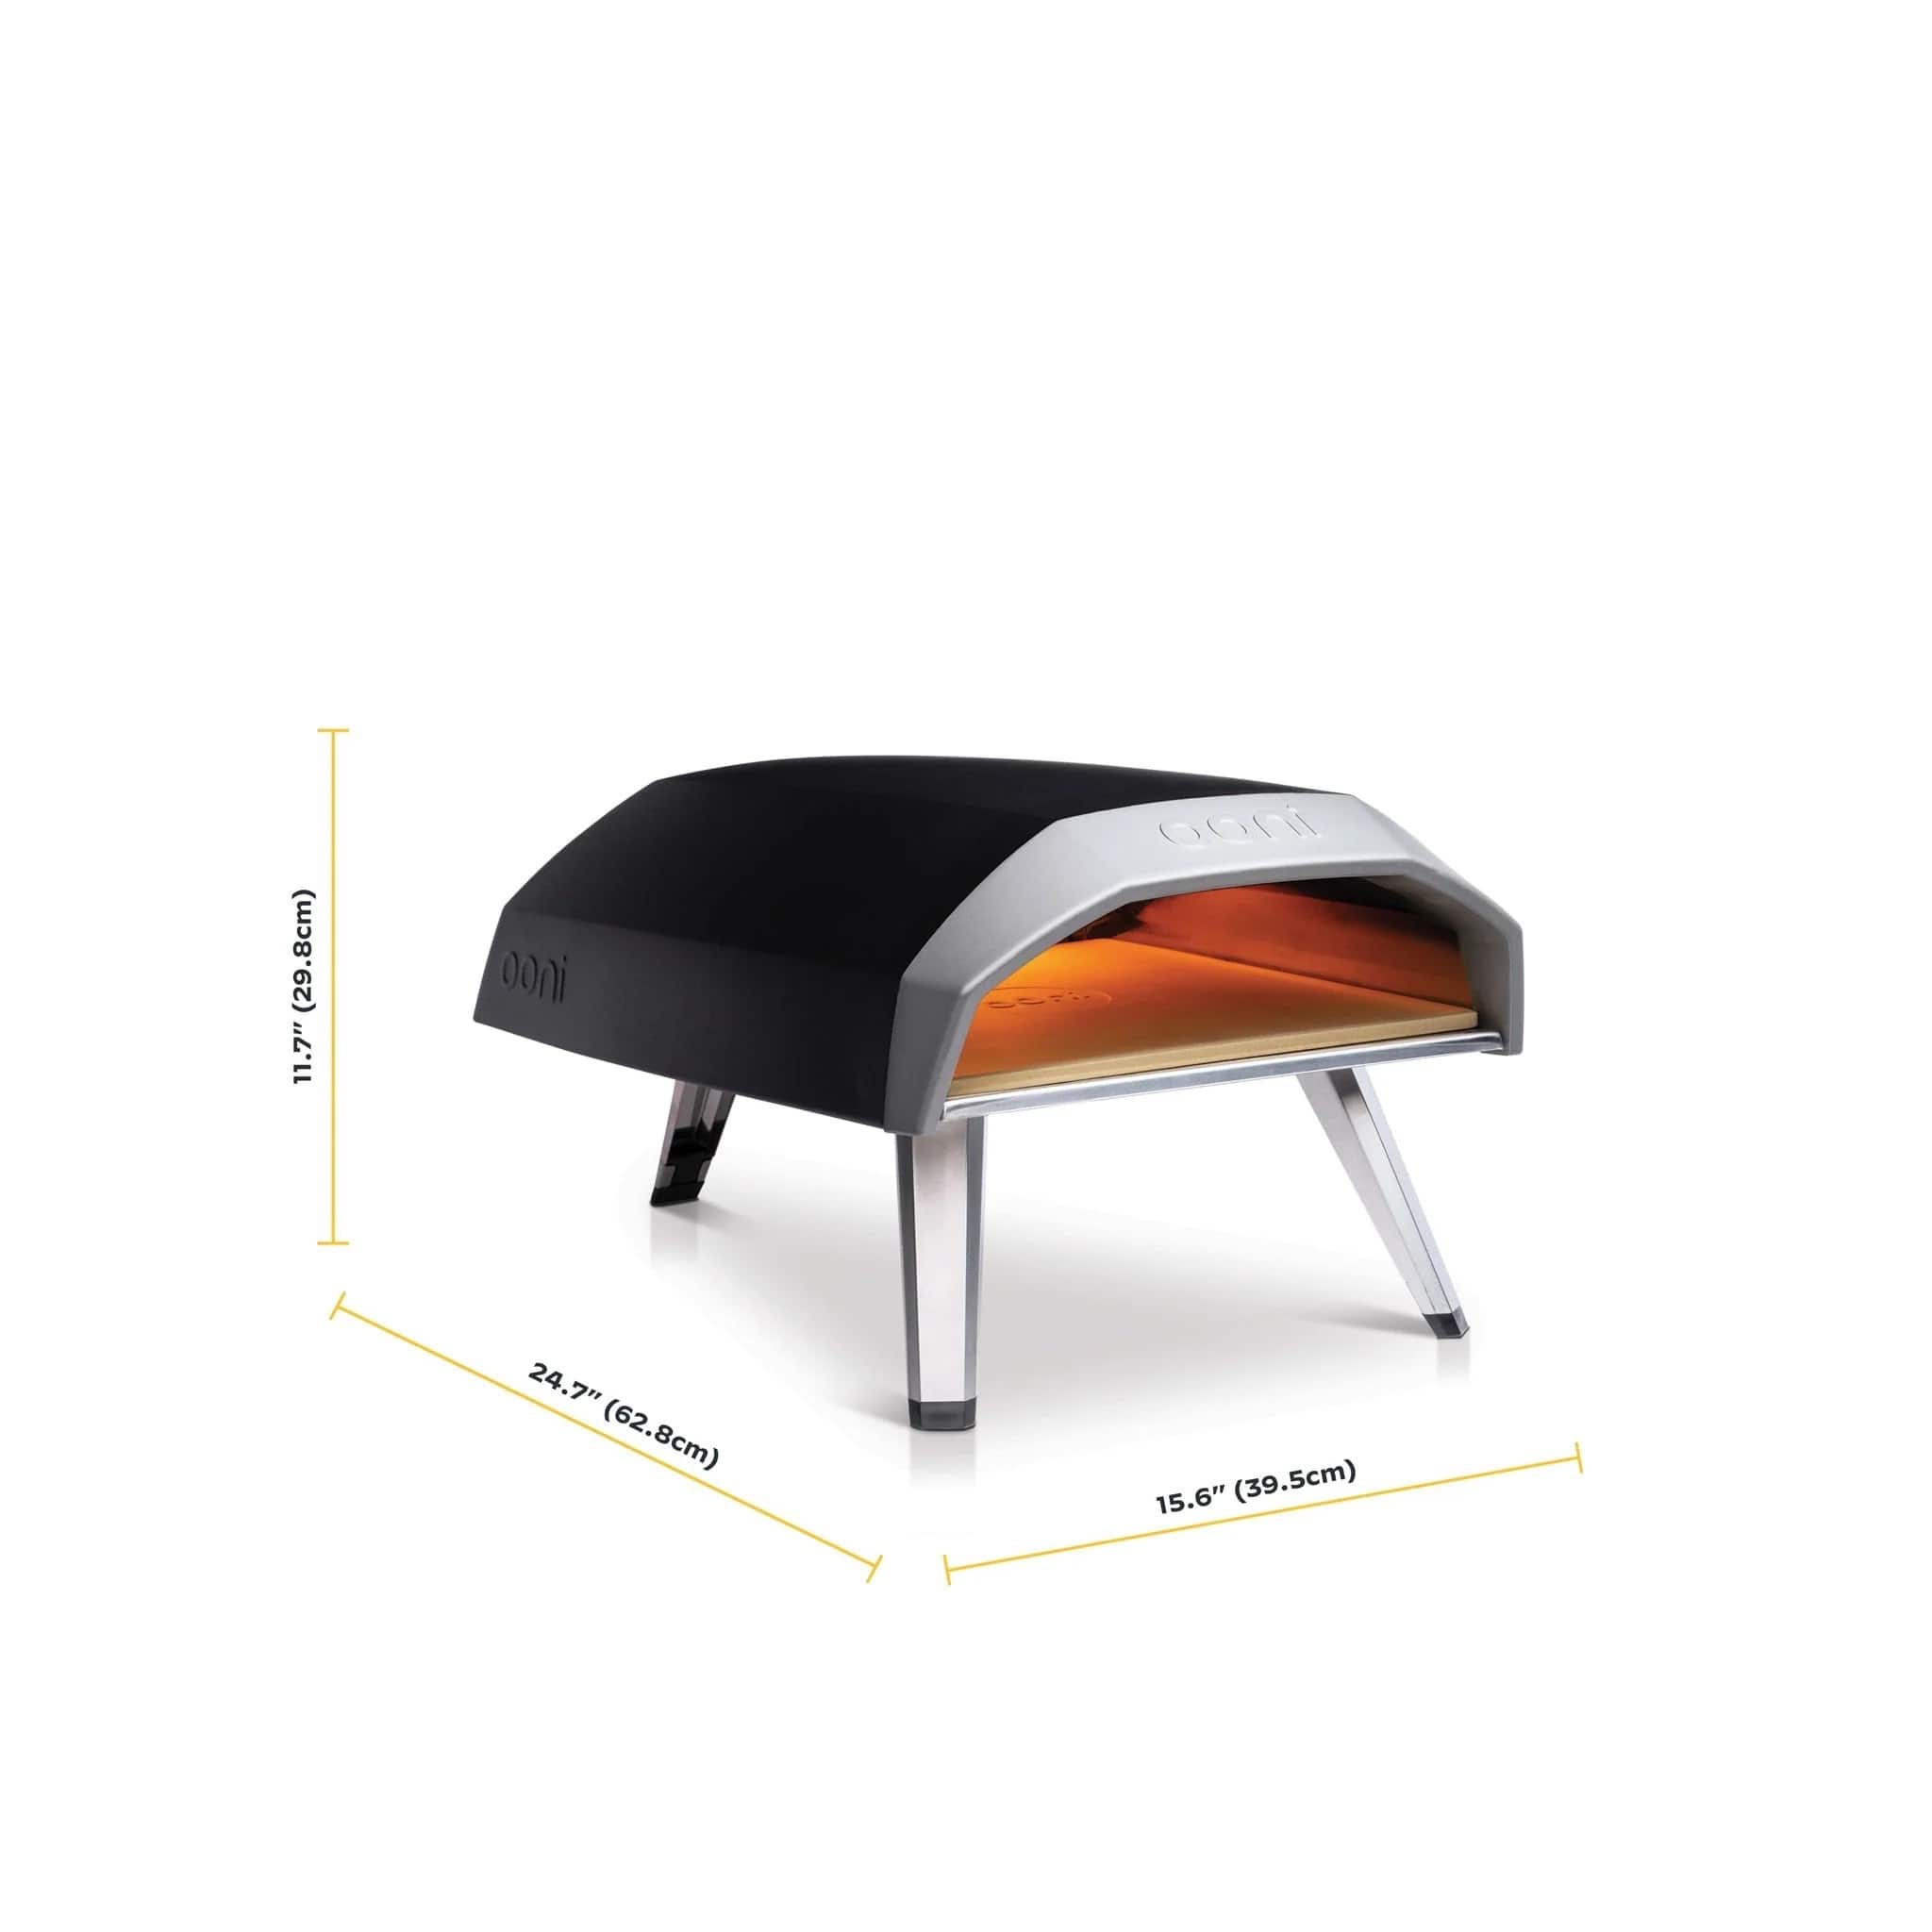 Ooni Koda 12 Portable Gas Fired Pizza Oven